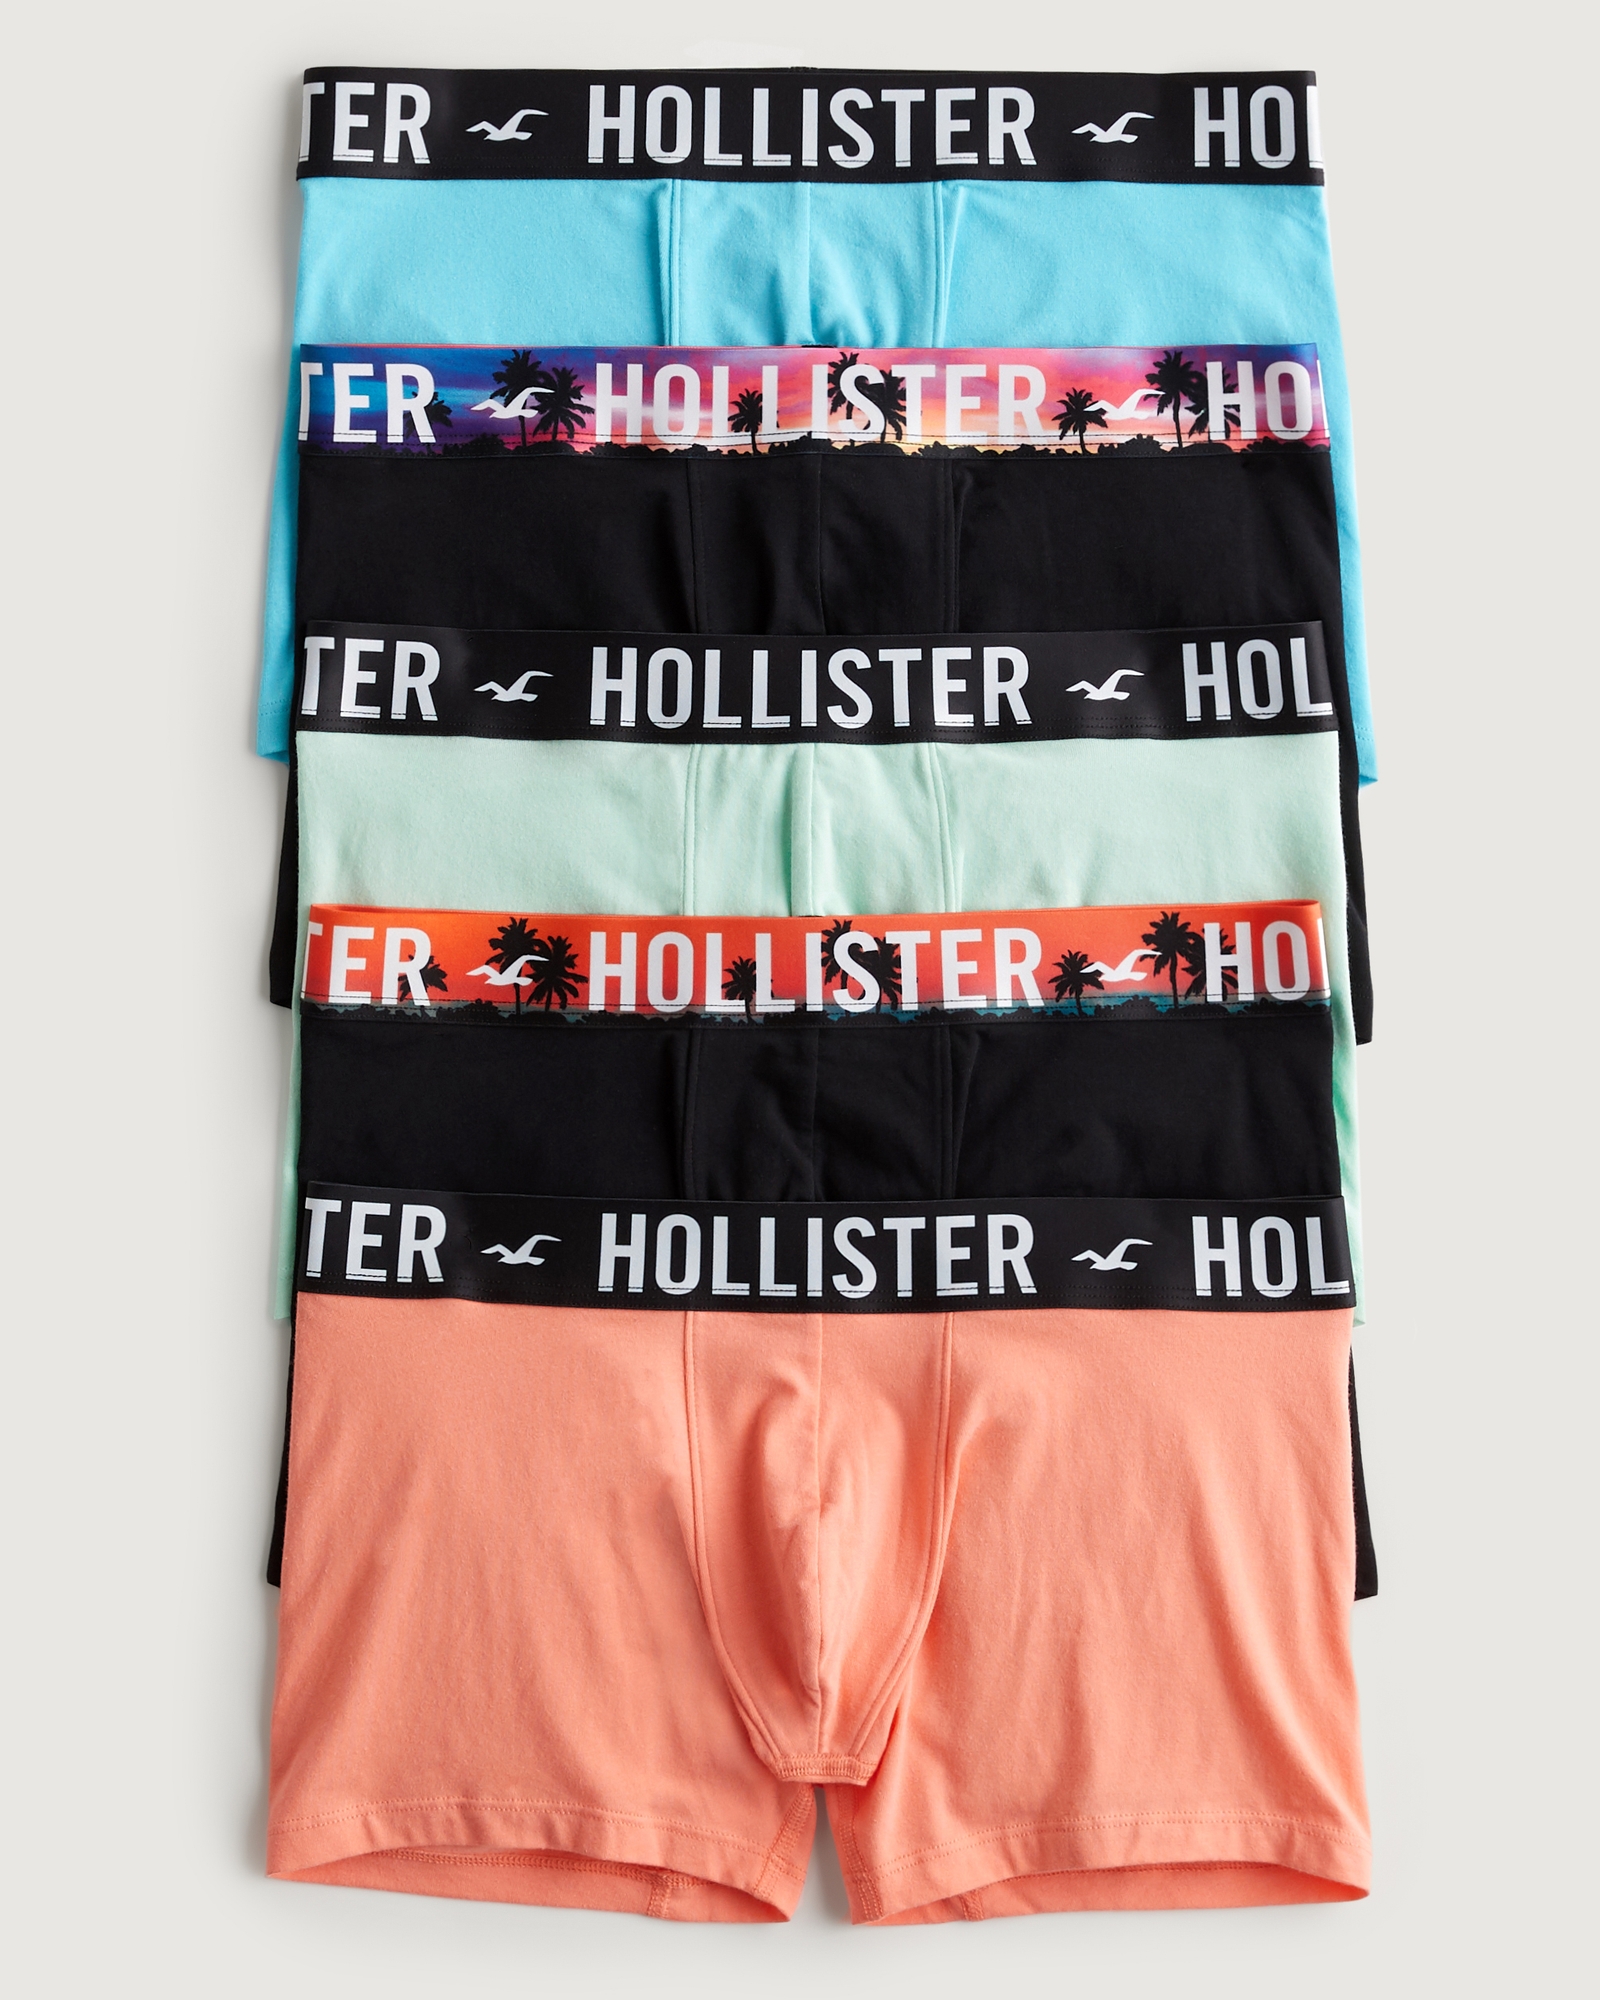 Hollister Boxer Brief 3-Pack All Black Men Size X-Small